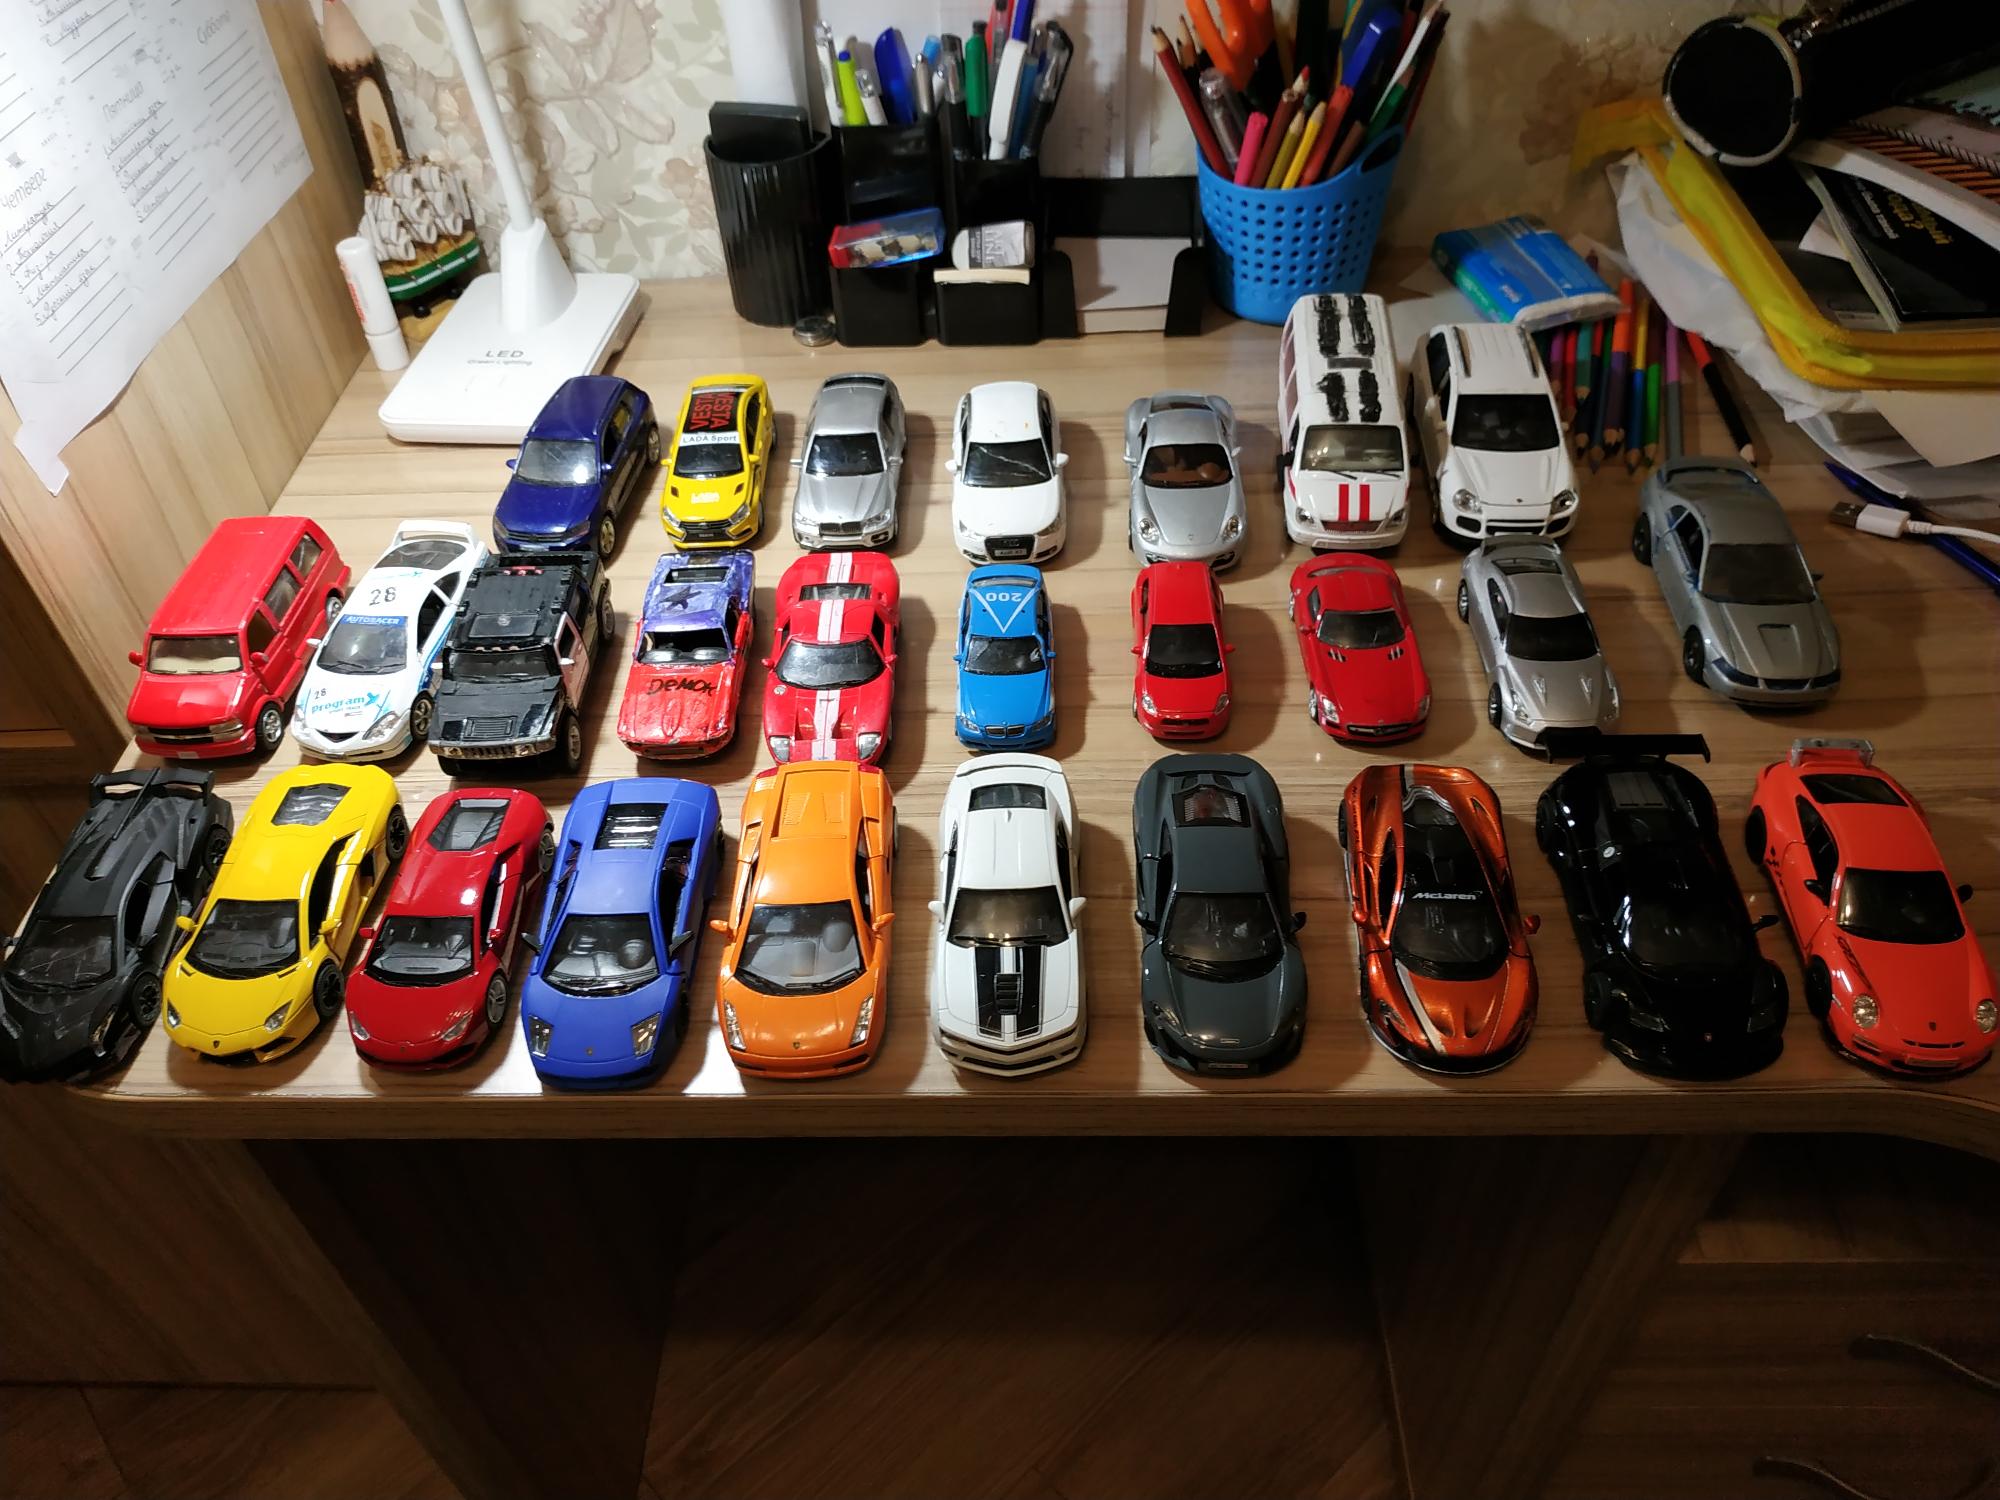 cars collection toys